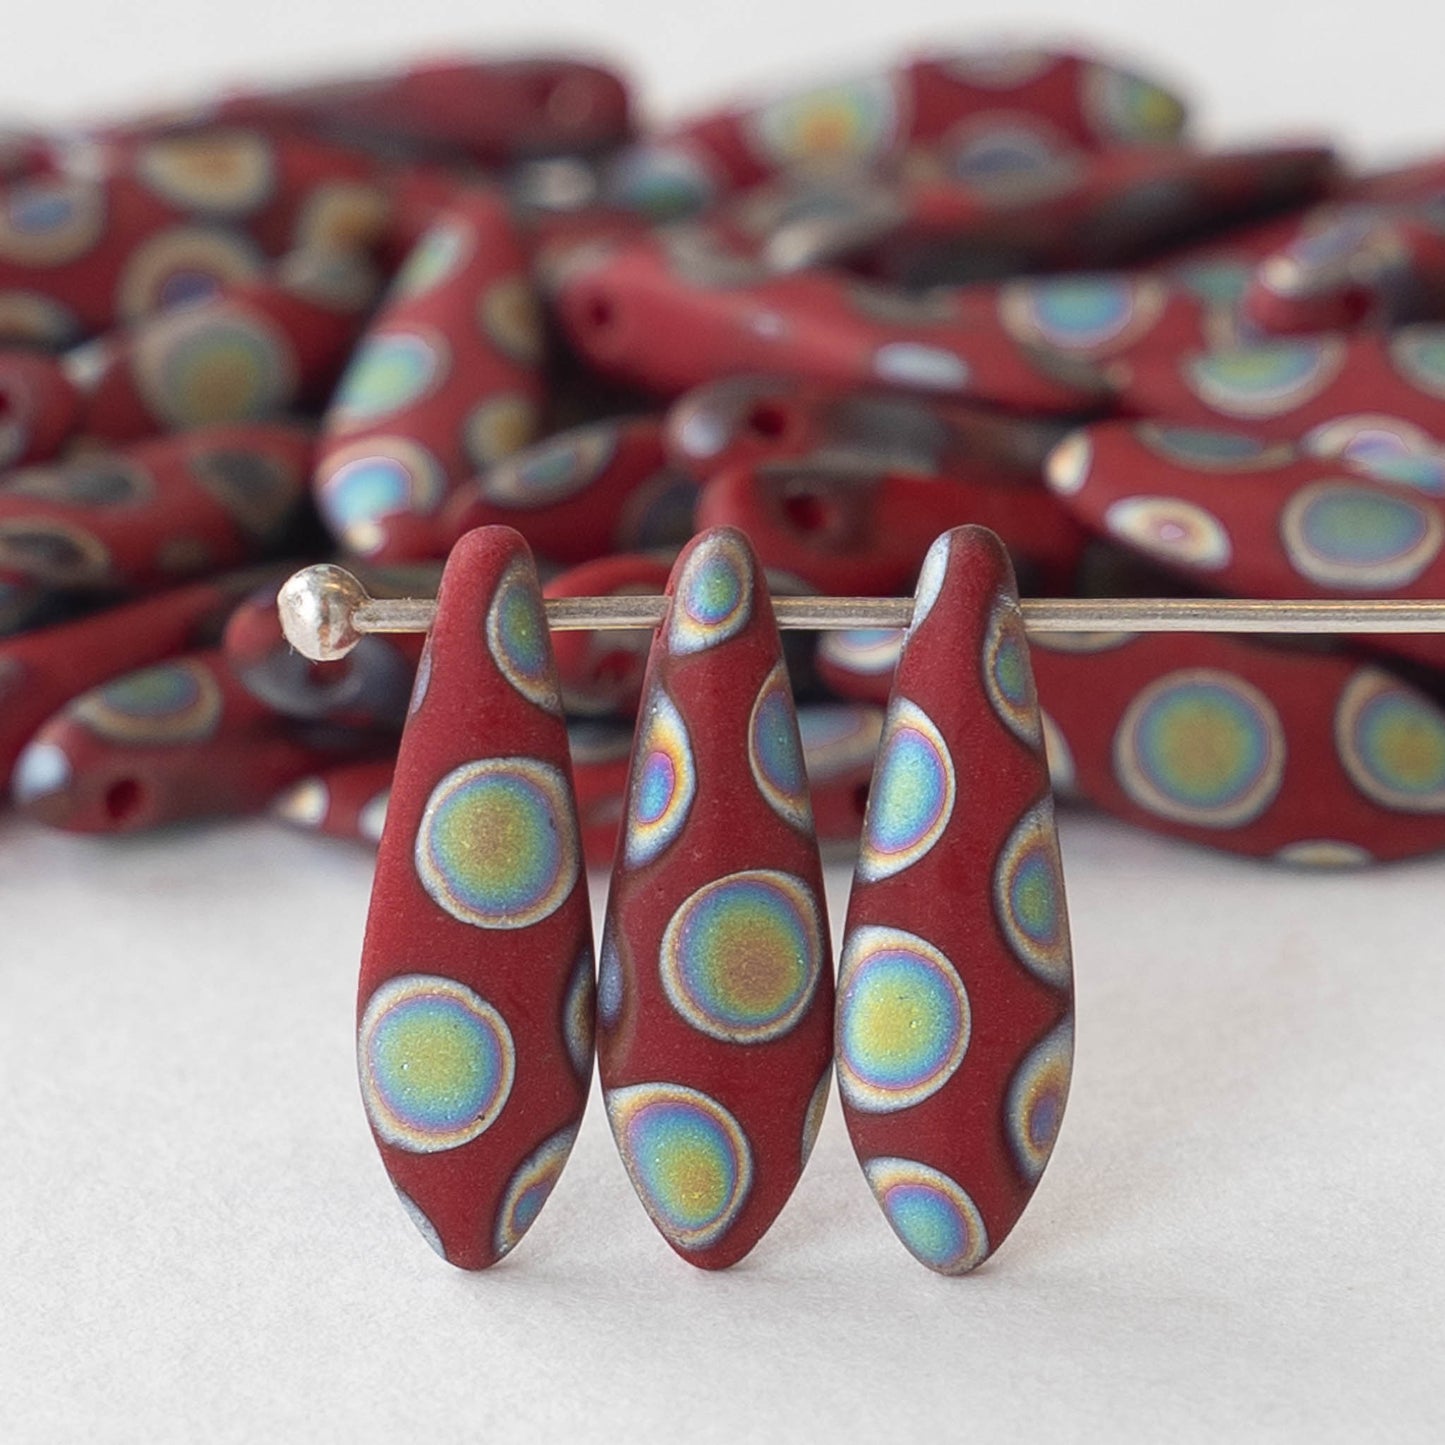 16mm Dagger Beads - Red Matte with Vitrail  Dots - 50 beads